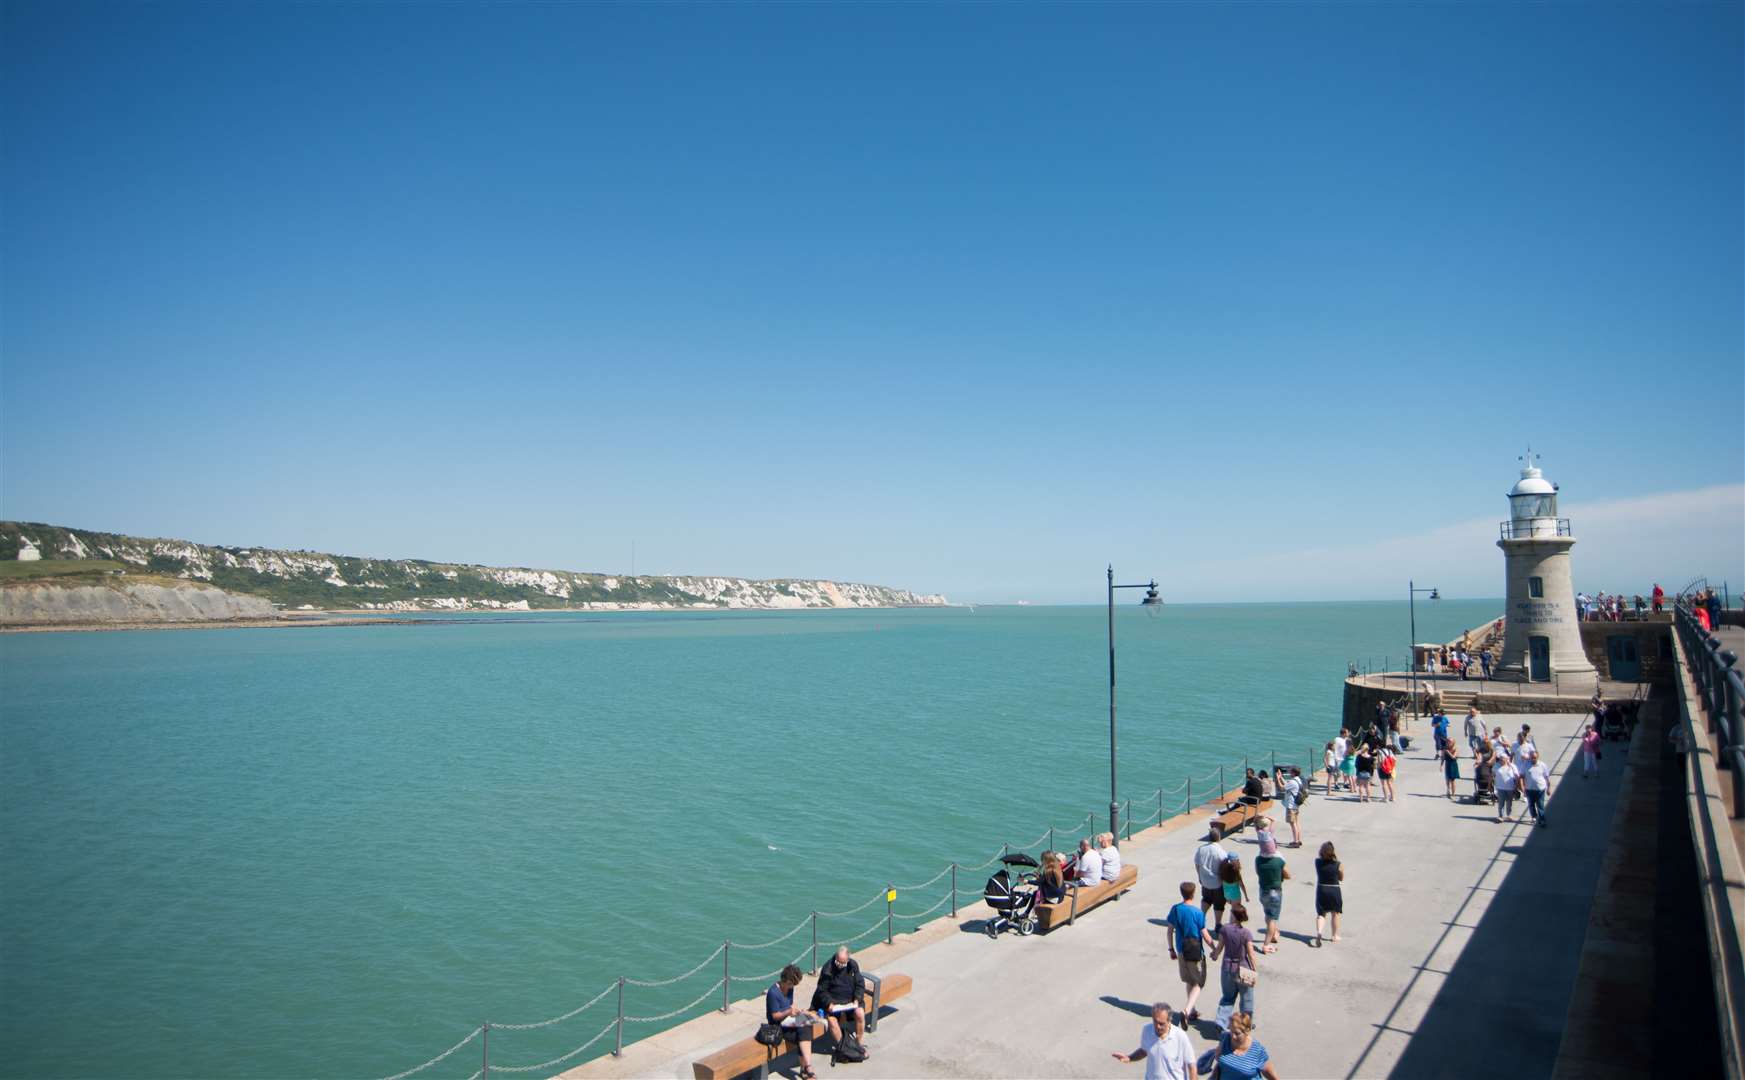 Folkestone Harbour Arm is part of the project